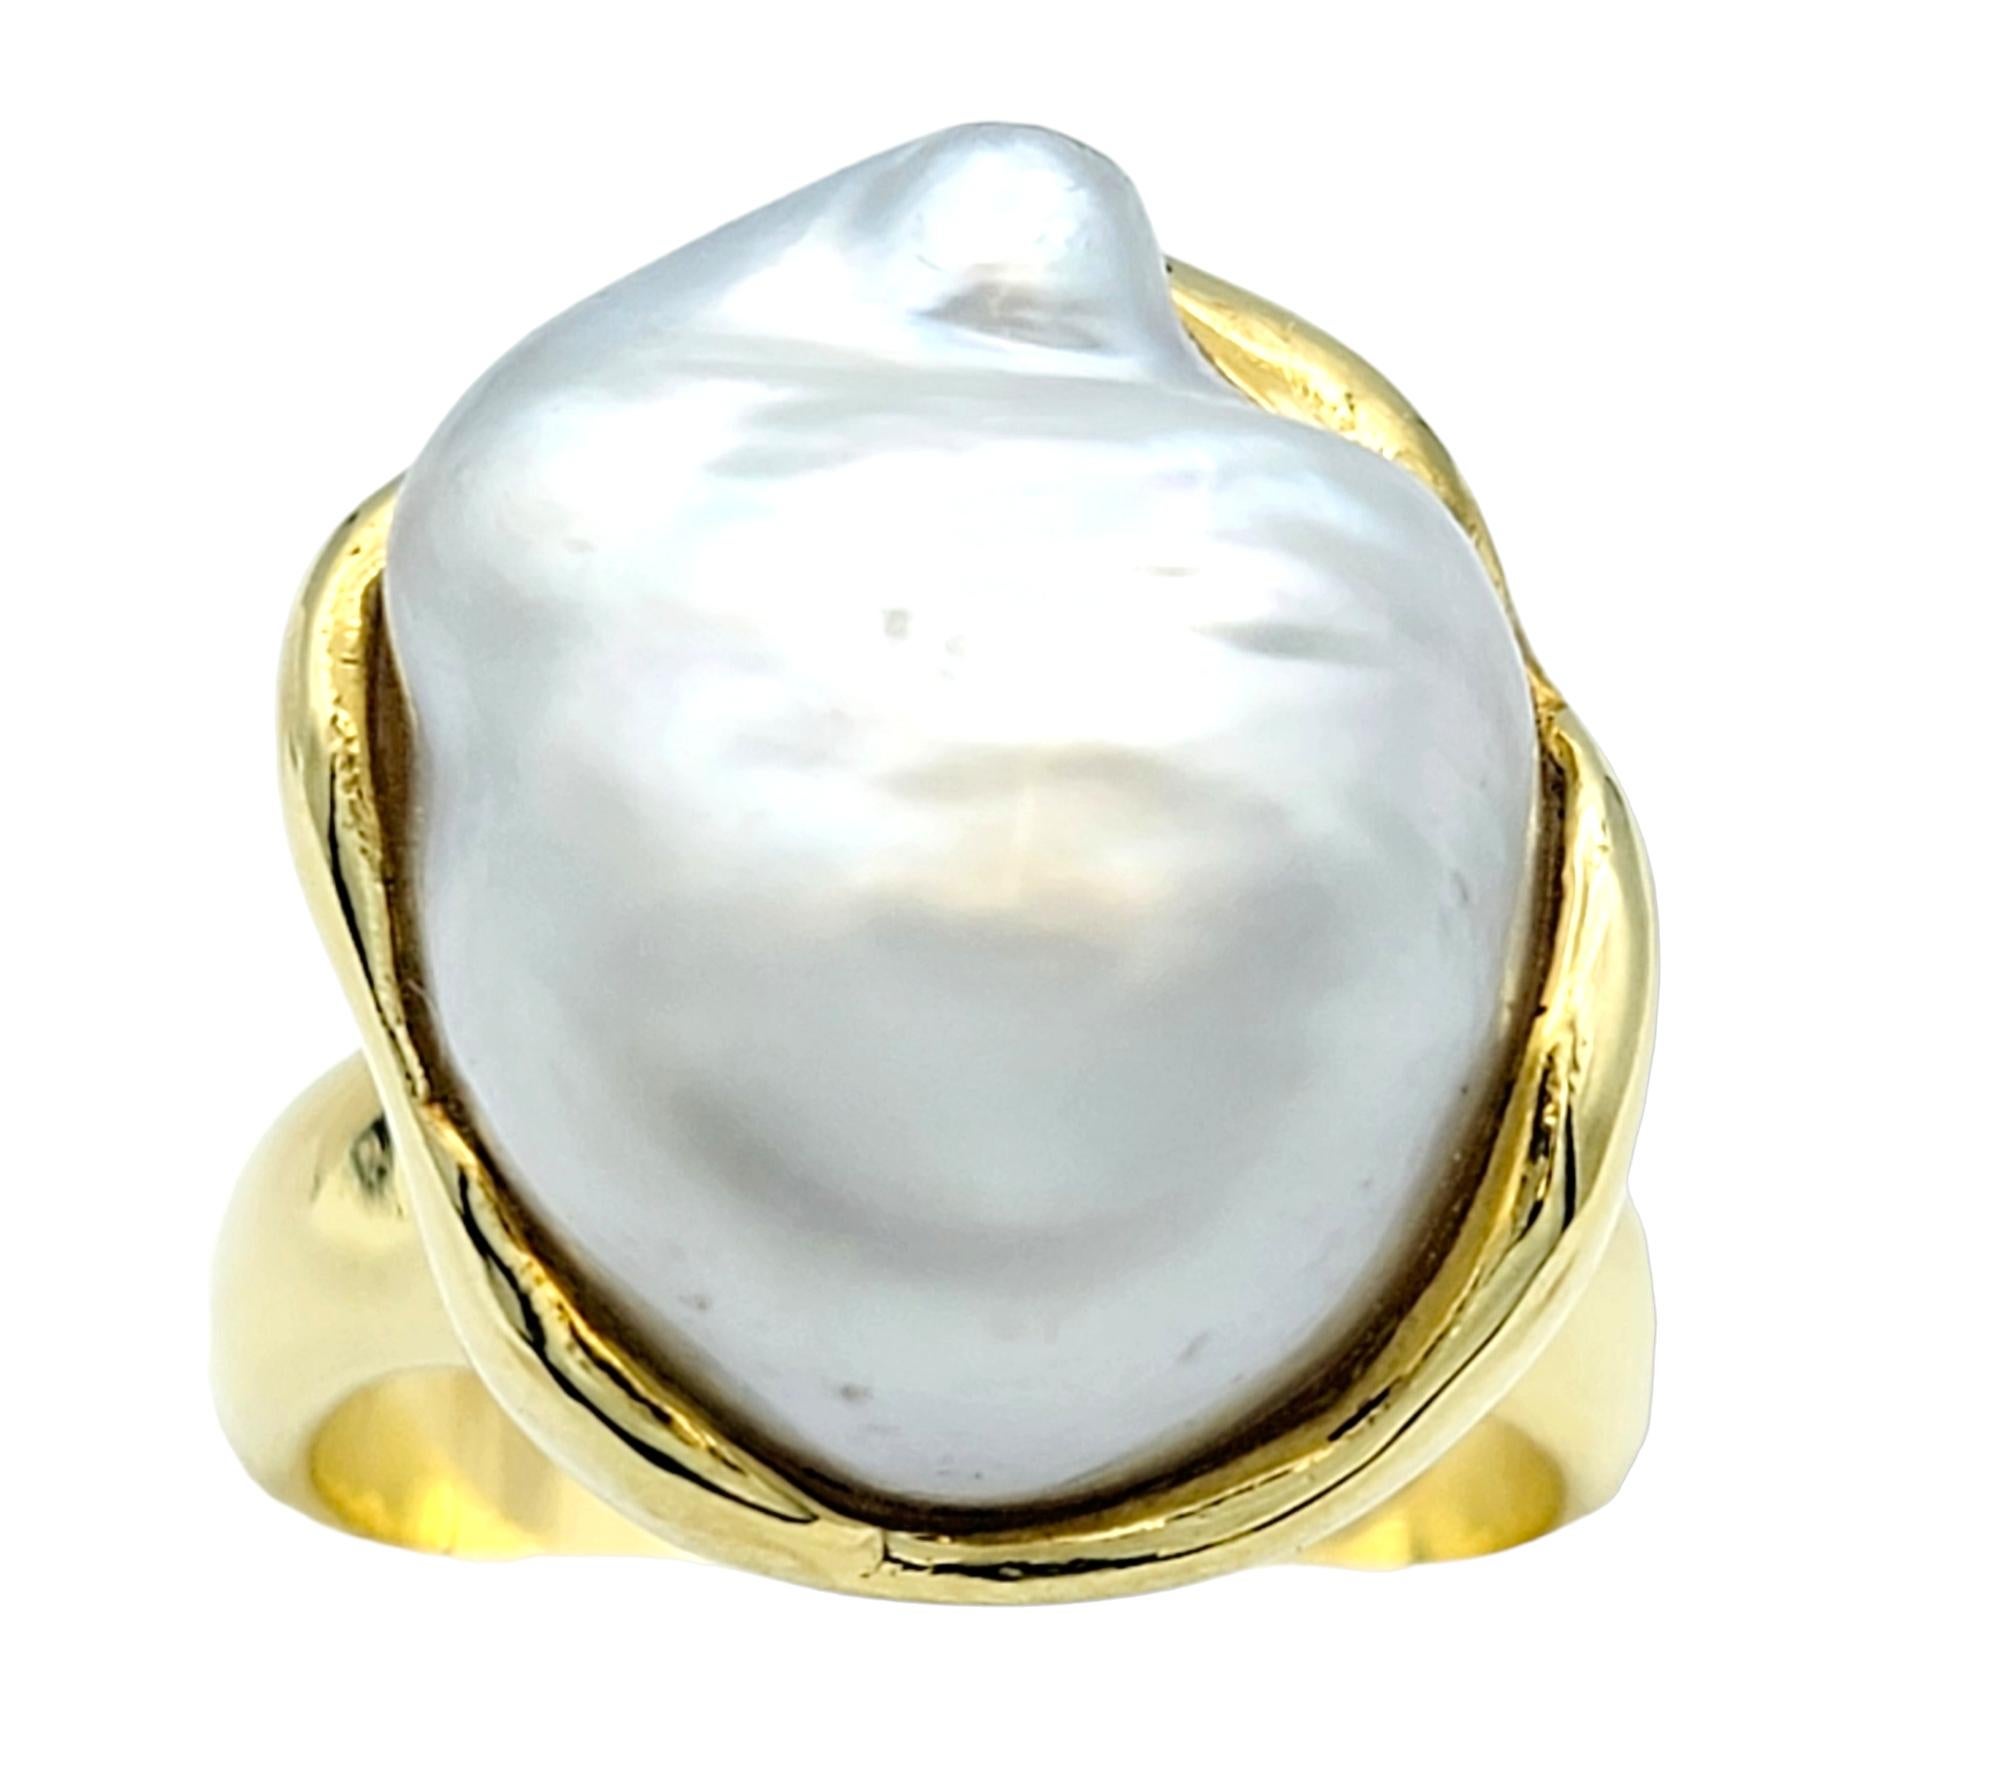 Ring size: 5.75

The opulent fusion of an extraordinary cultured baroque freshwater pearl ensconced within an exquisite 18 karat gold ring conjures an unparalleled work of fine jewelry. The 18 karat gold brings a lustrous brilliance to this piece